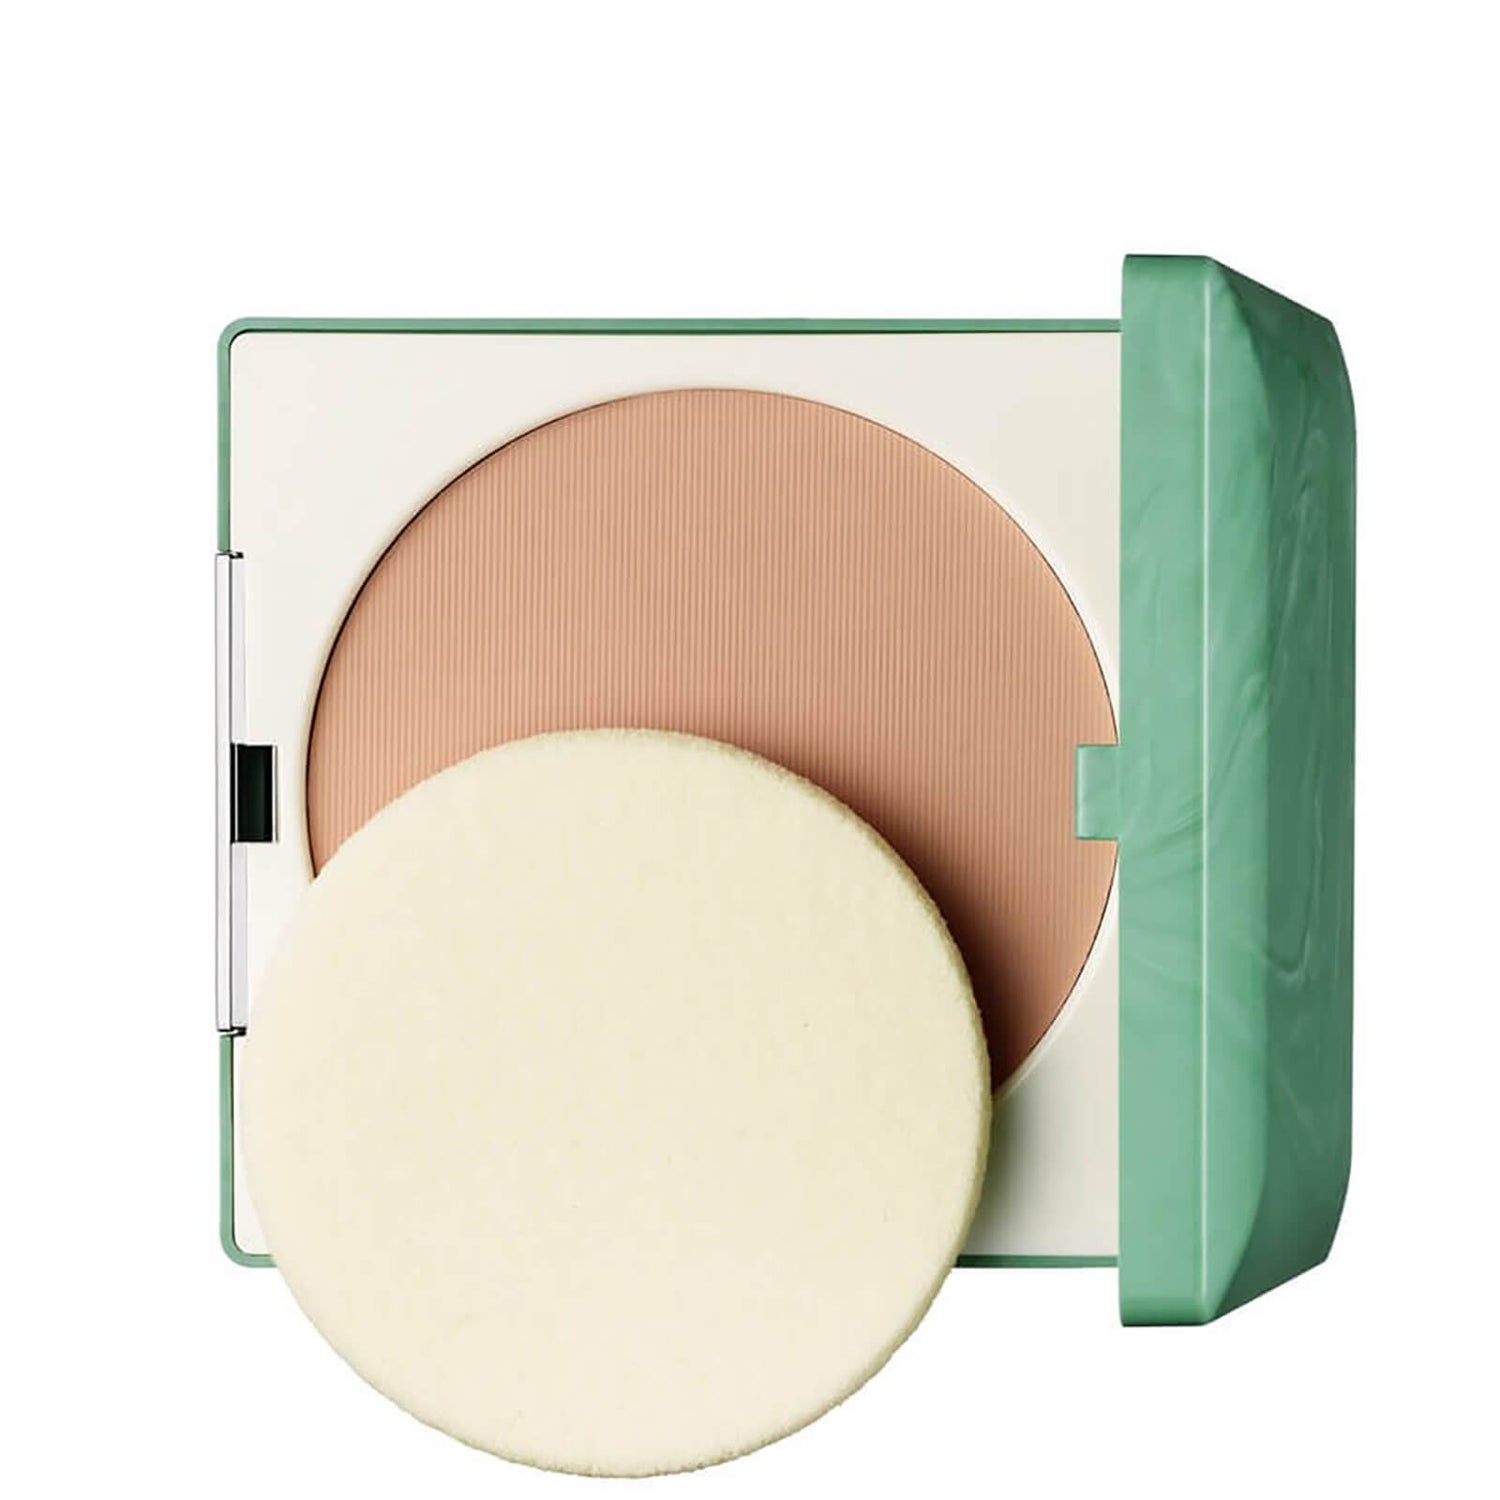 Clinique Stay-Matte Sheer Pressed Powder Oil-Free 7,6g